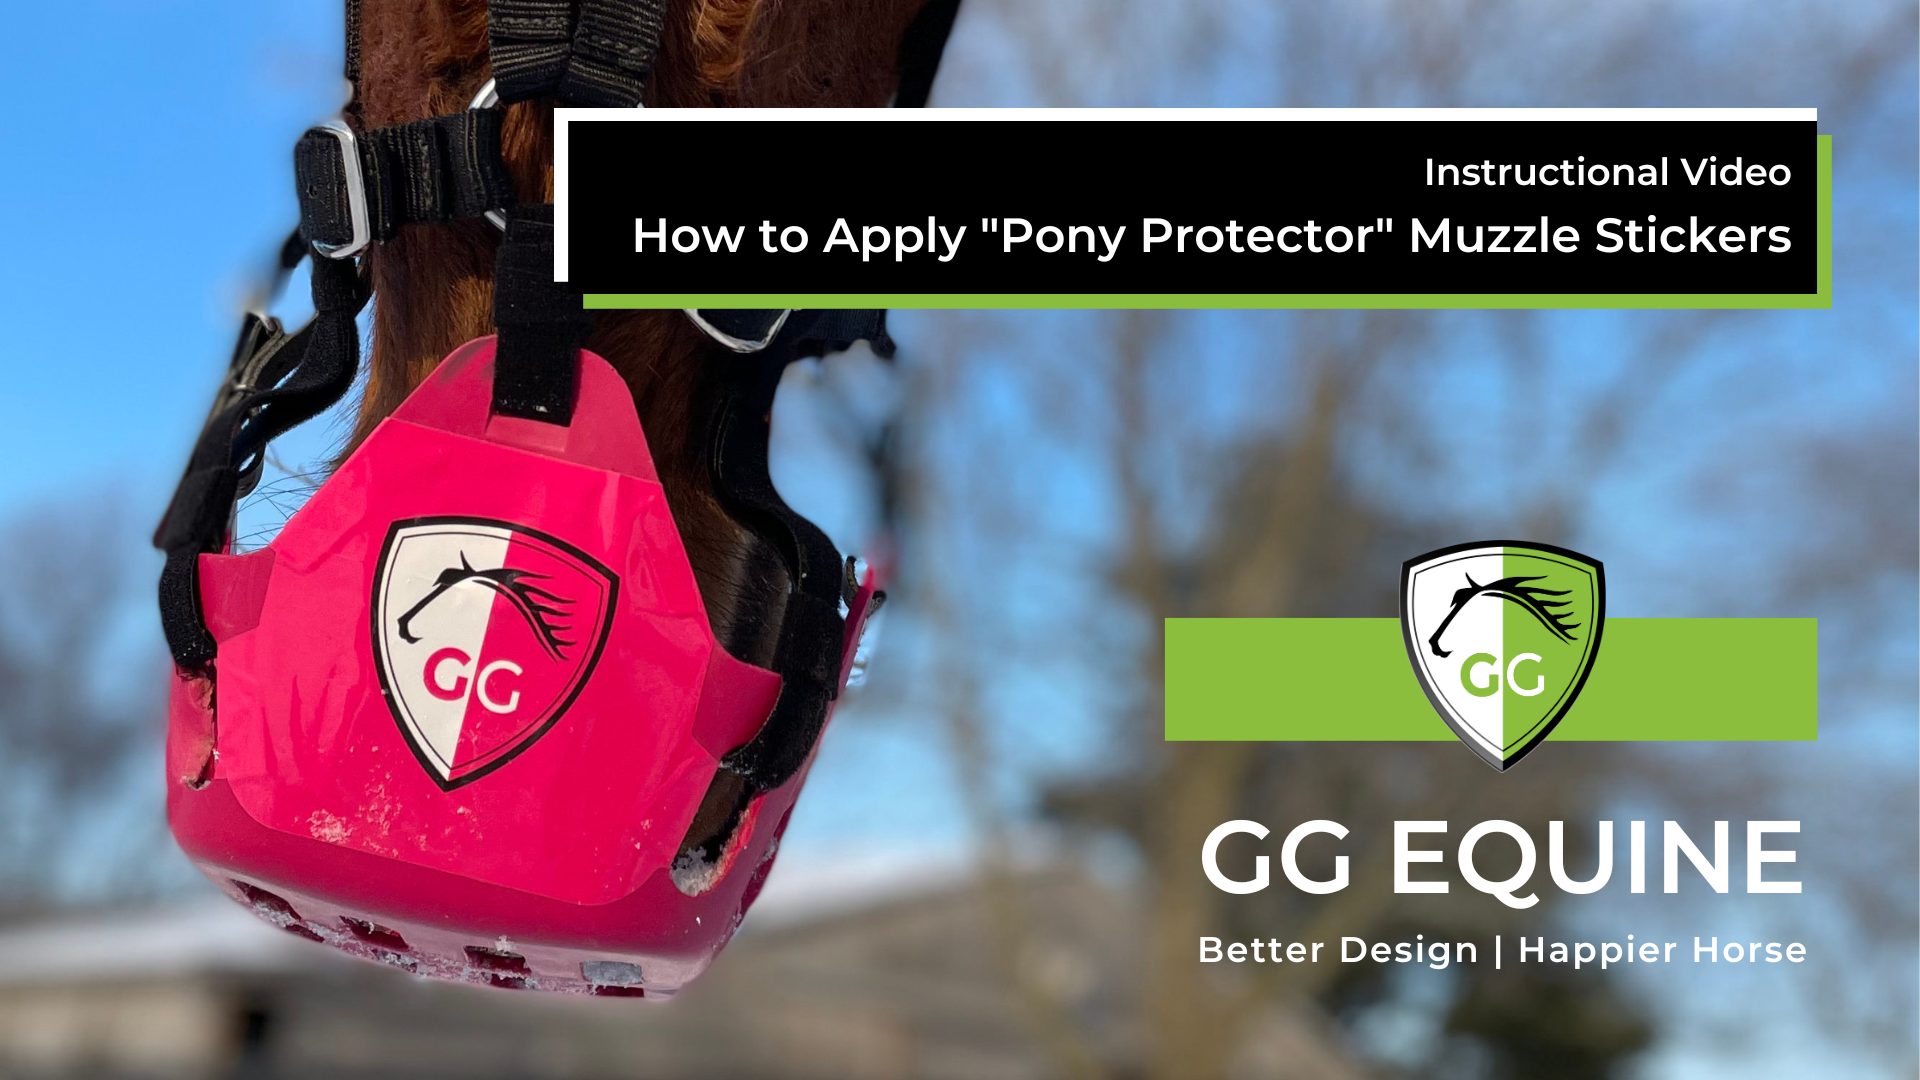 Load video: Full tutorial and instruction video for the GG Pony Protector Muzzle Stickers